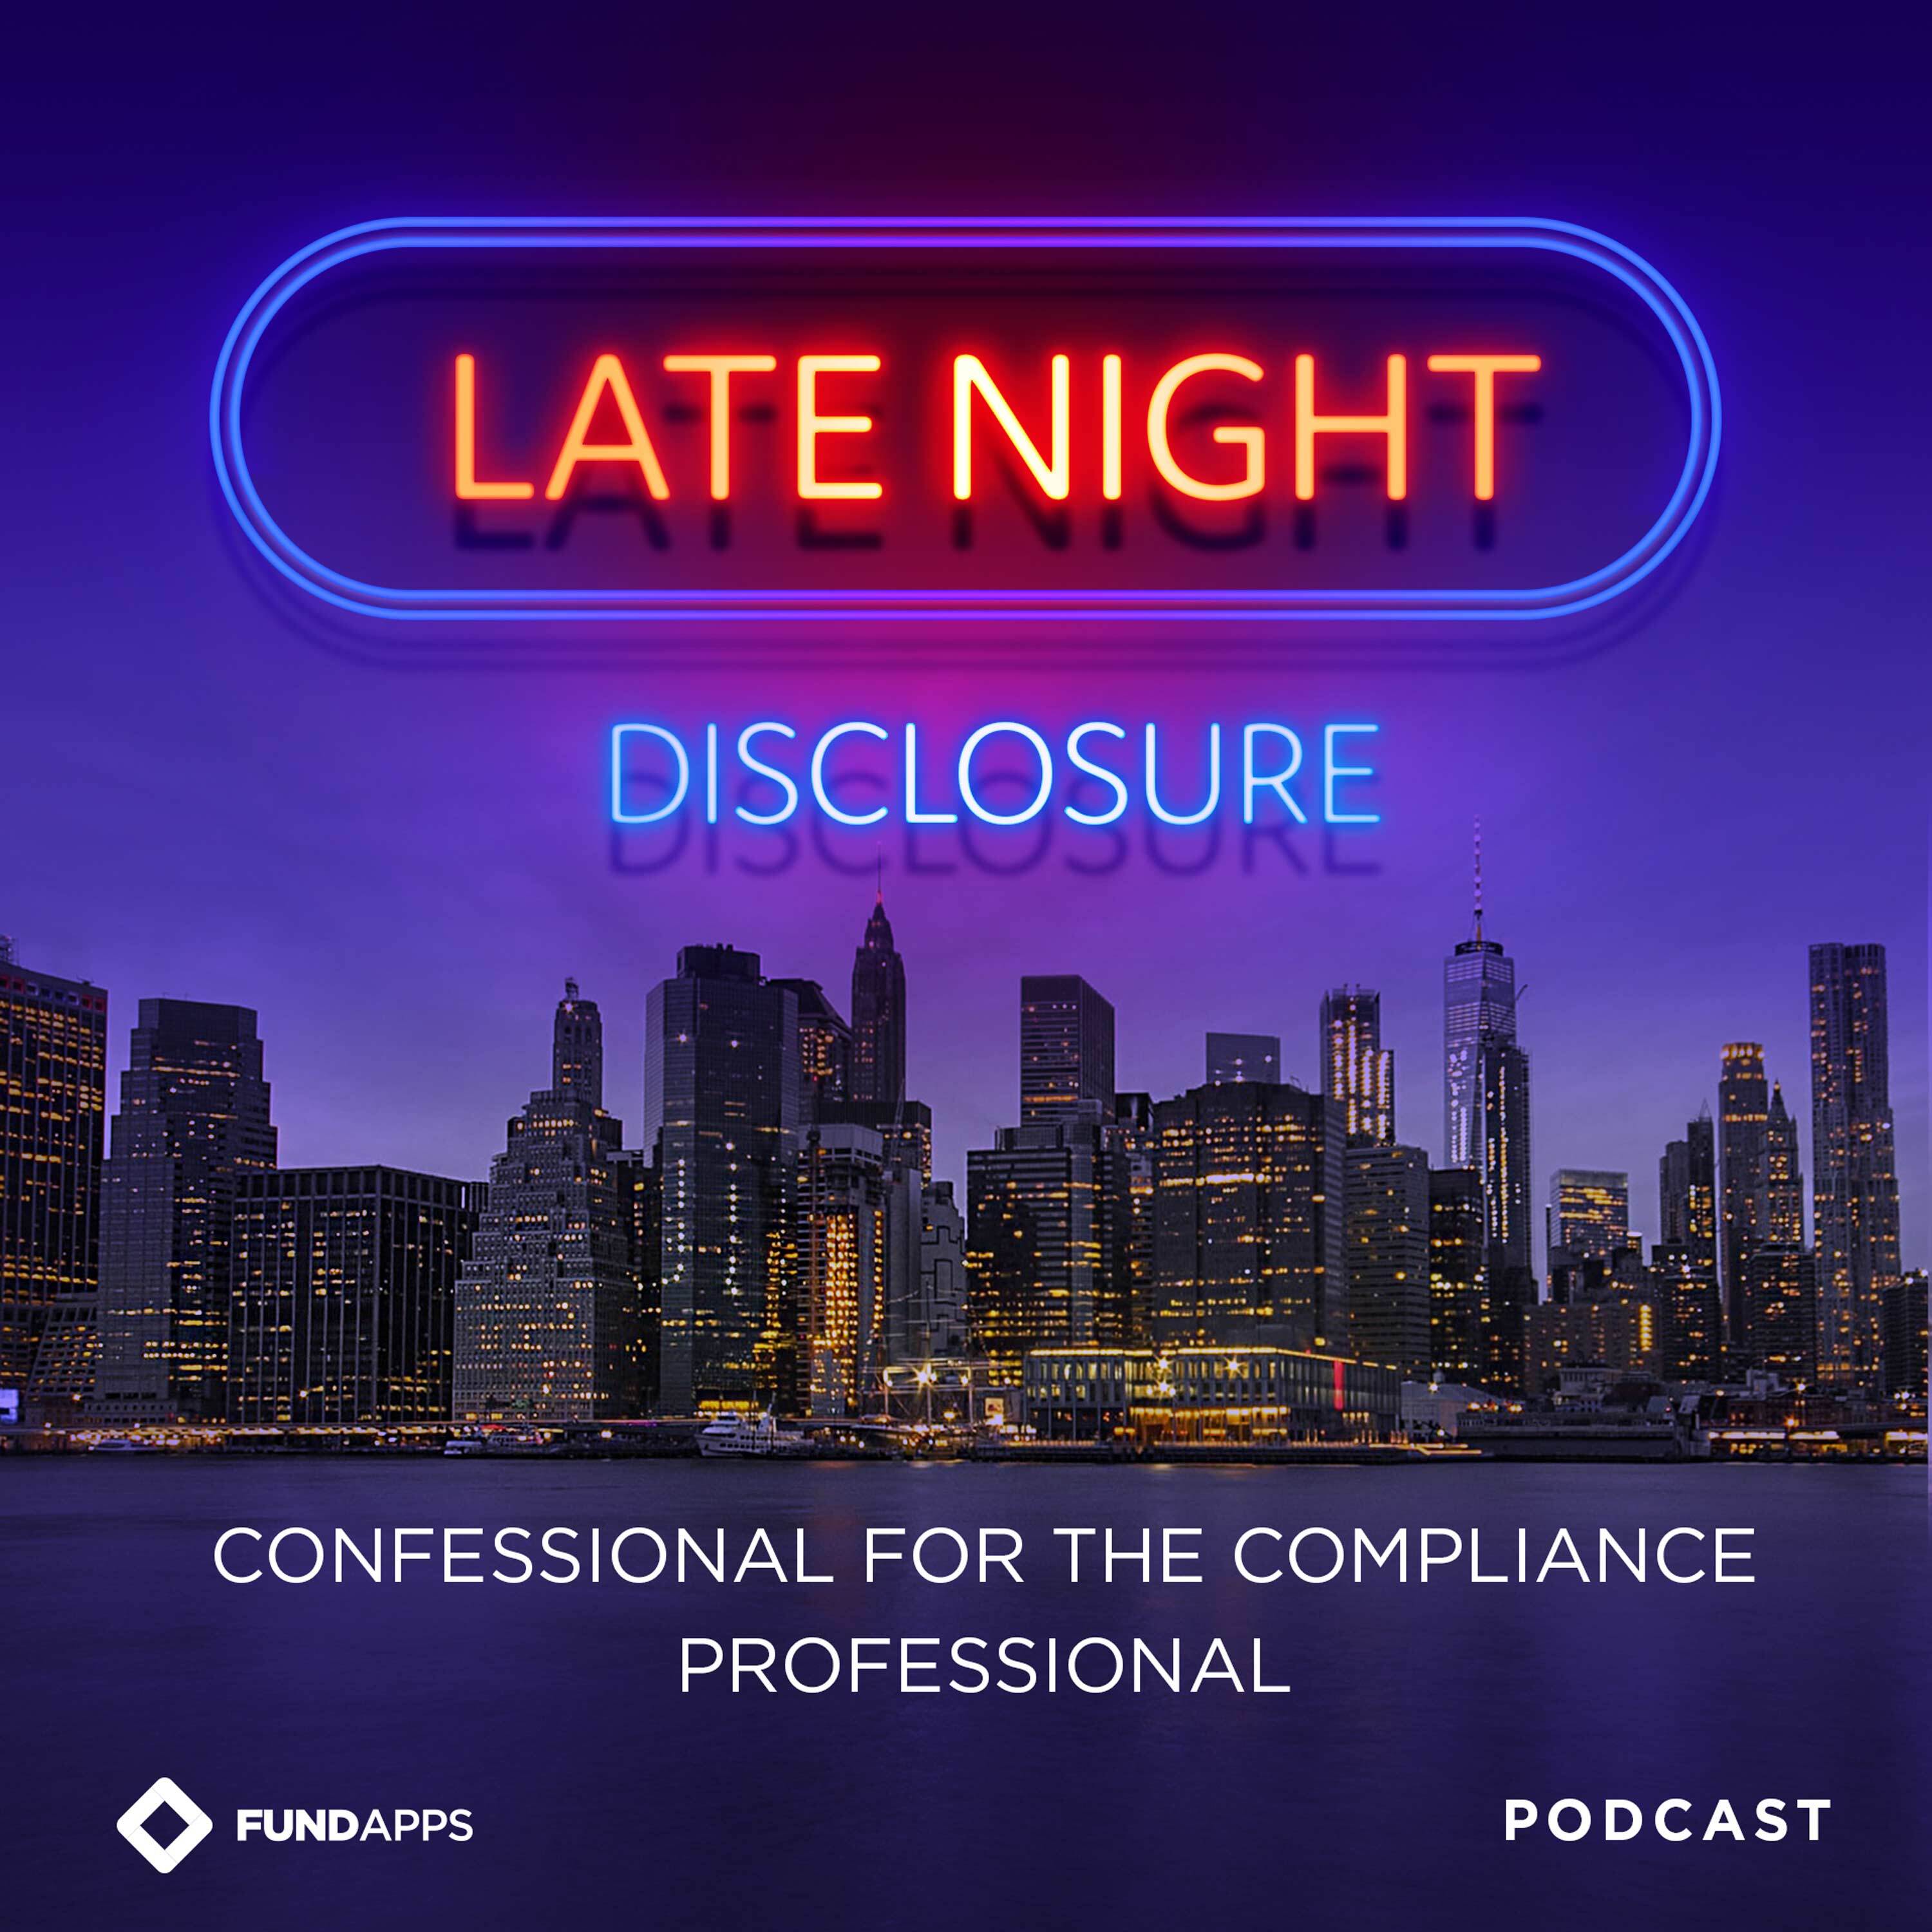 Artwork for podcast Late Night Disclosure